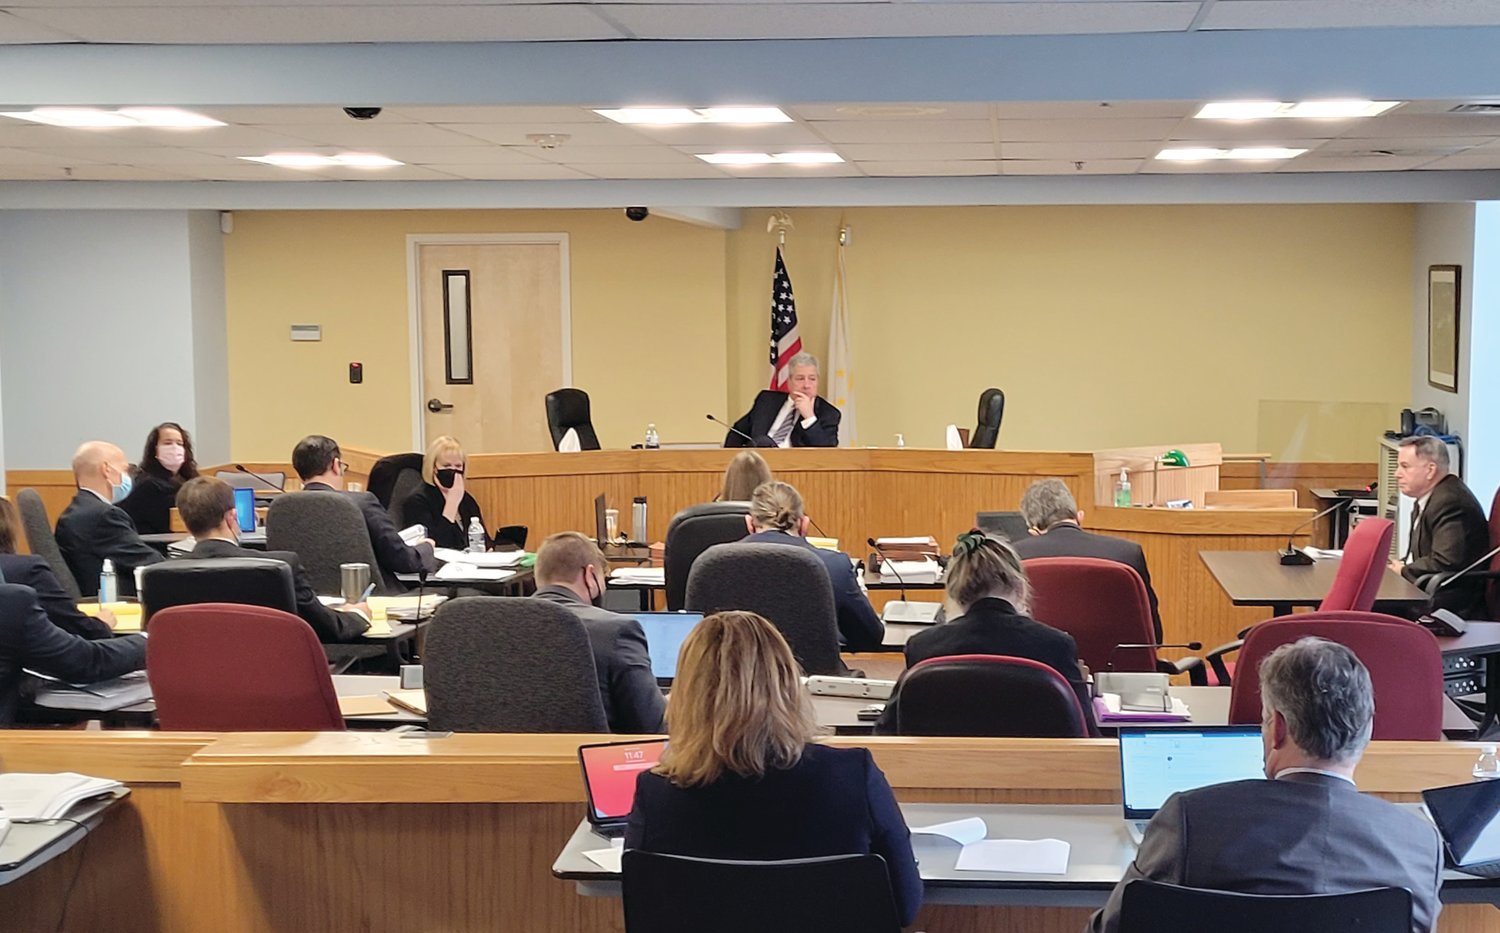 ELECTRIC TESTIMONY: Last Thursday, attorneys for PPL questioned Michael R. Ballaban, a Managing Consultant for Daymark
Energy Advisors, who testified on behalf of the Rhode Island Attorney General’s office.